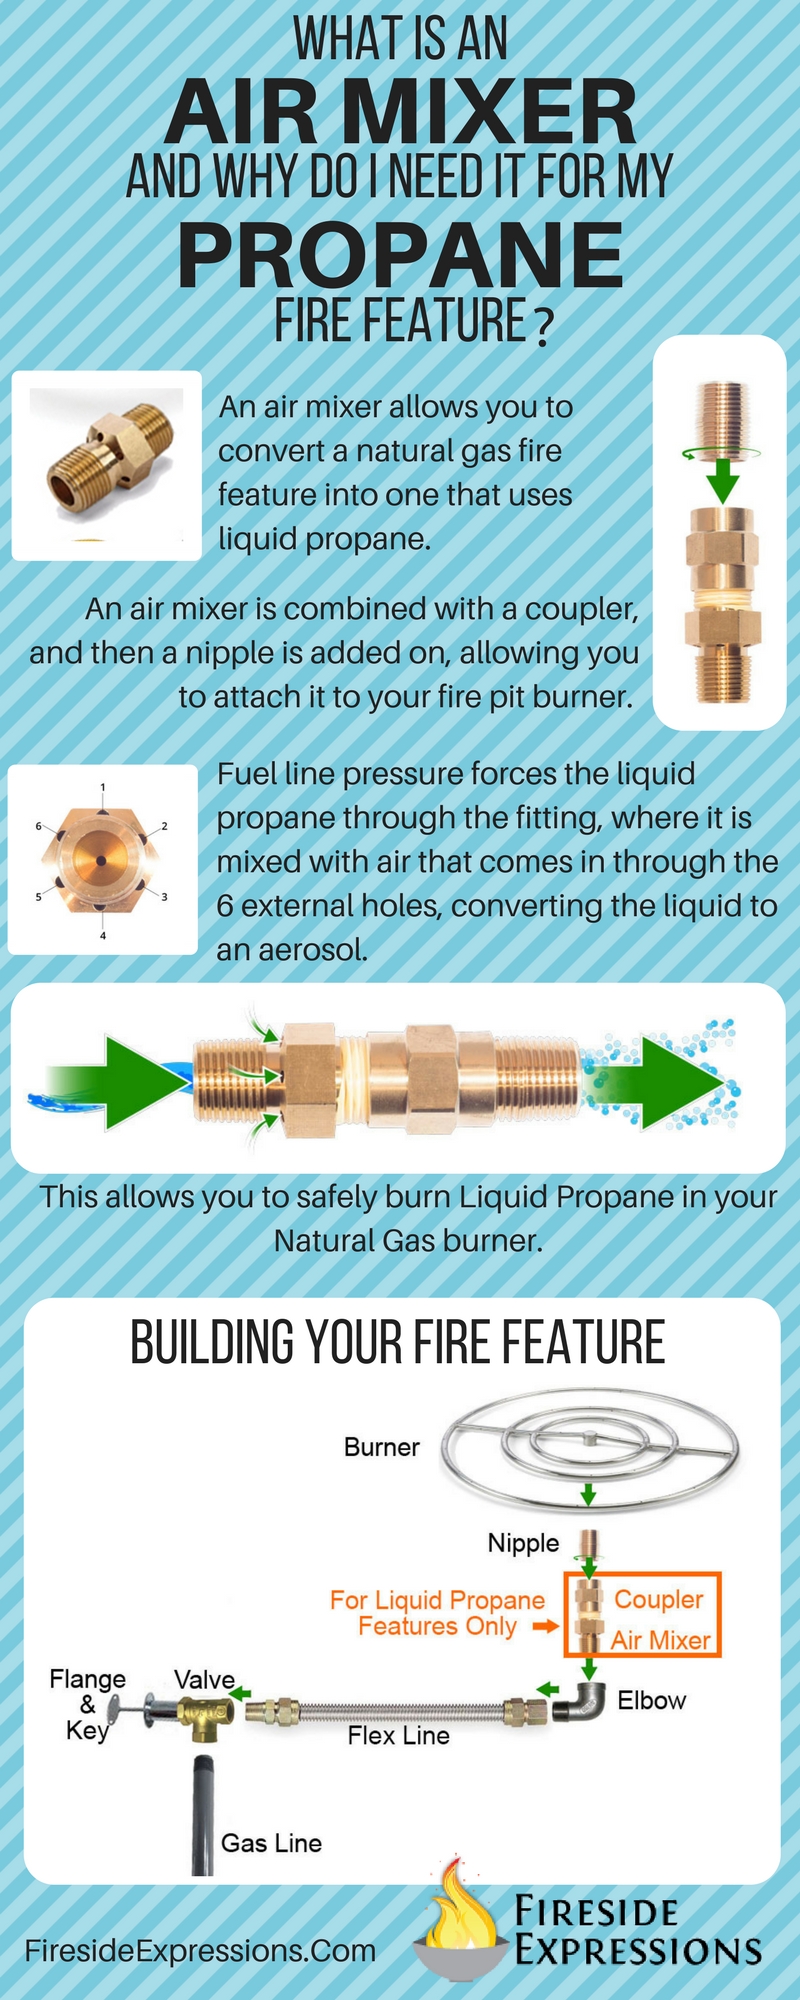 What Is An Air Mixer & Why You Need It For Your Propane Feature - FREE Infographic